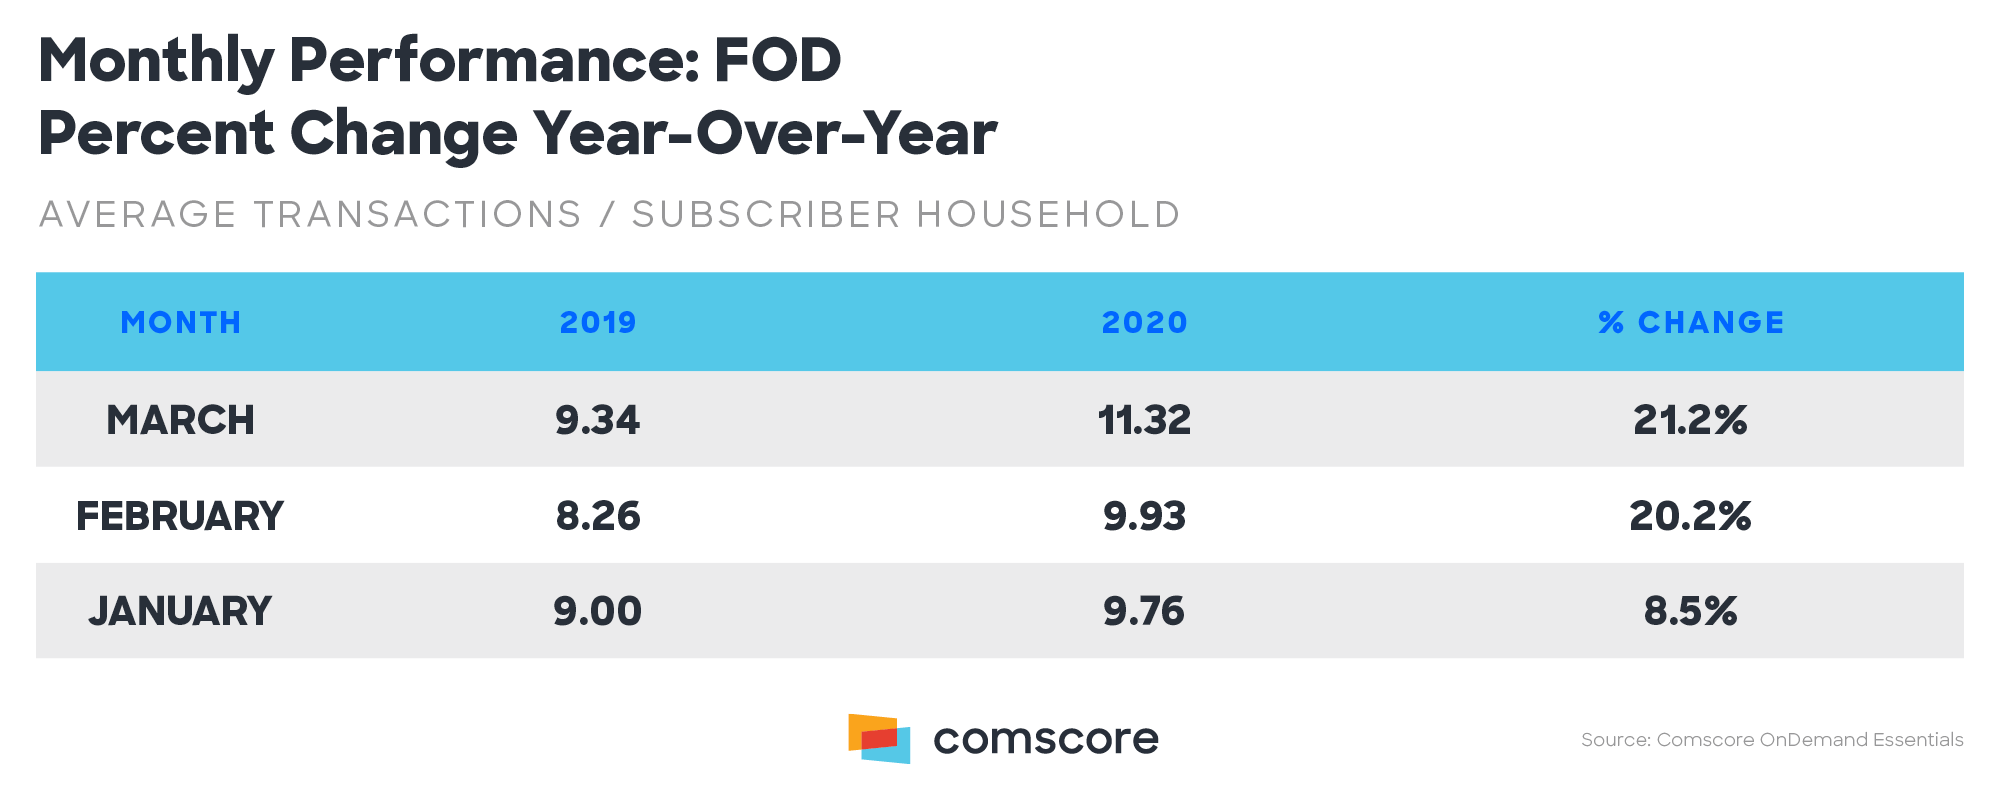 Monthly Performance All FOD Percent Change Year over Year